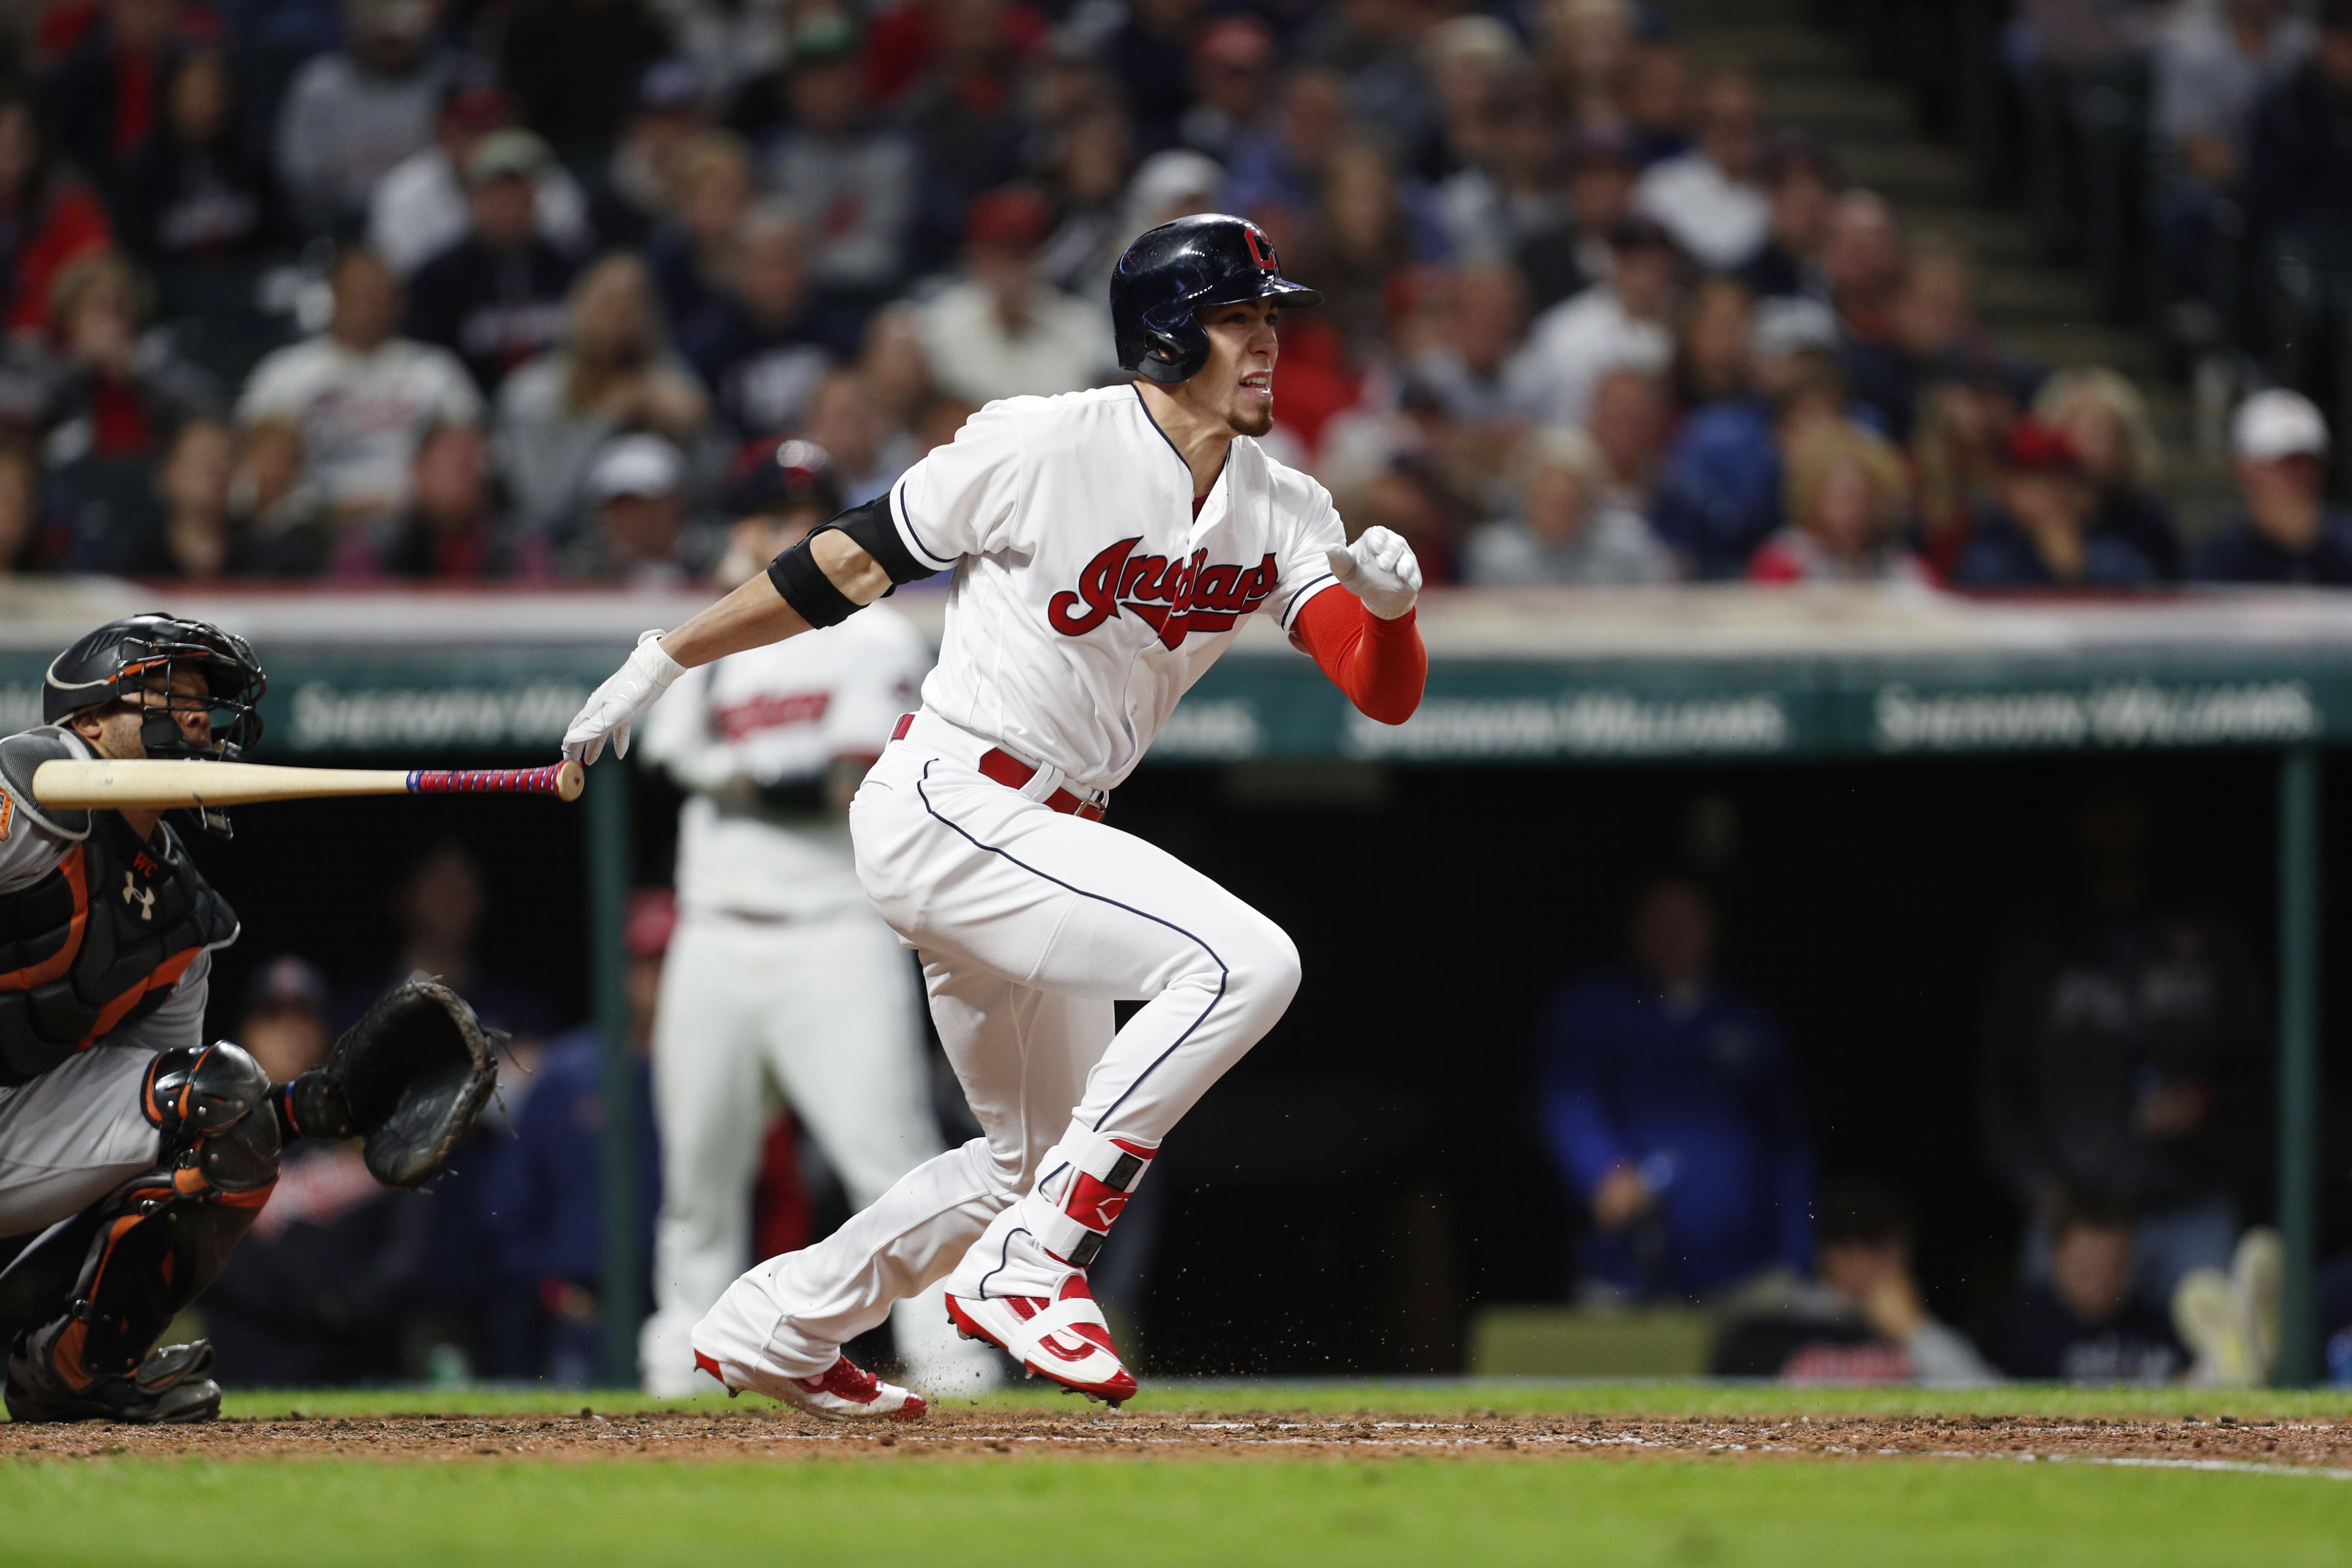 Cleveland Indians: Bradley Zimmer had a solid start to his career in 2017